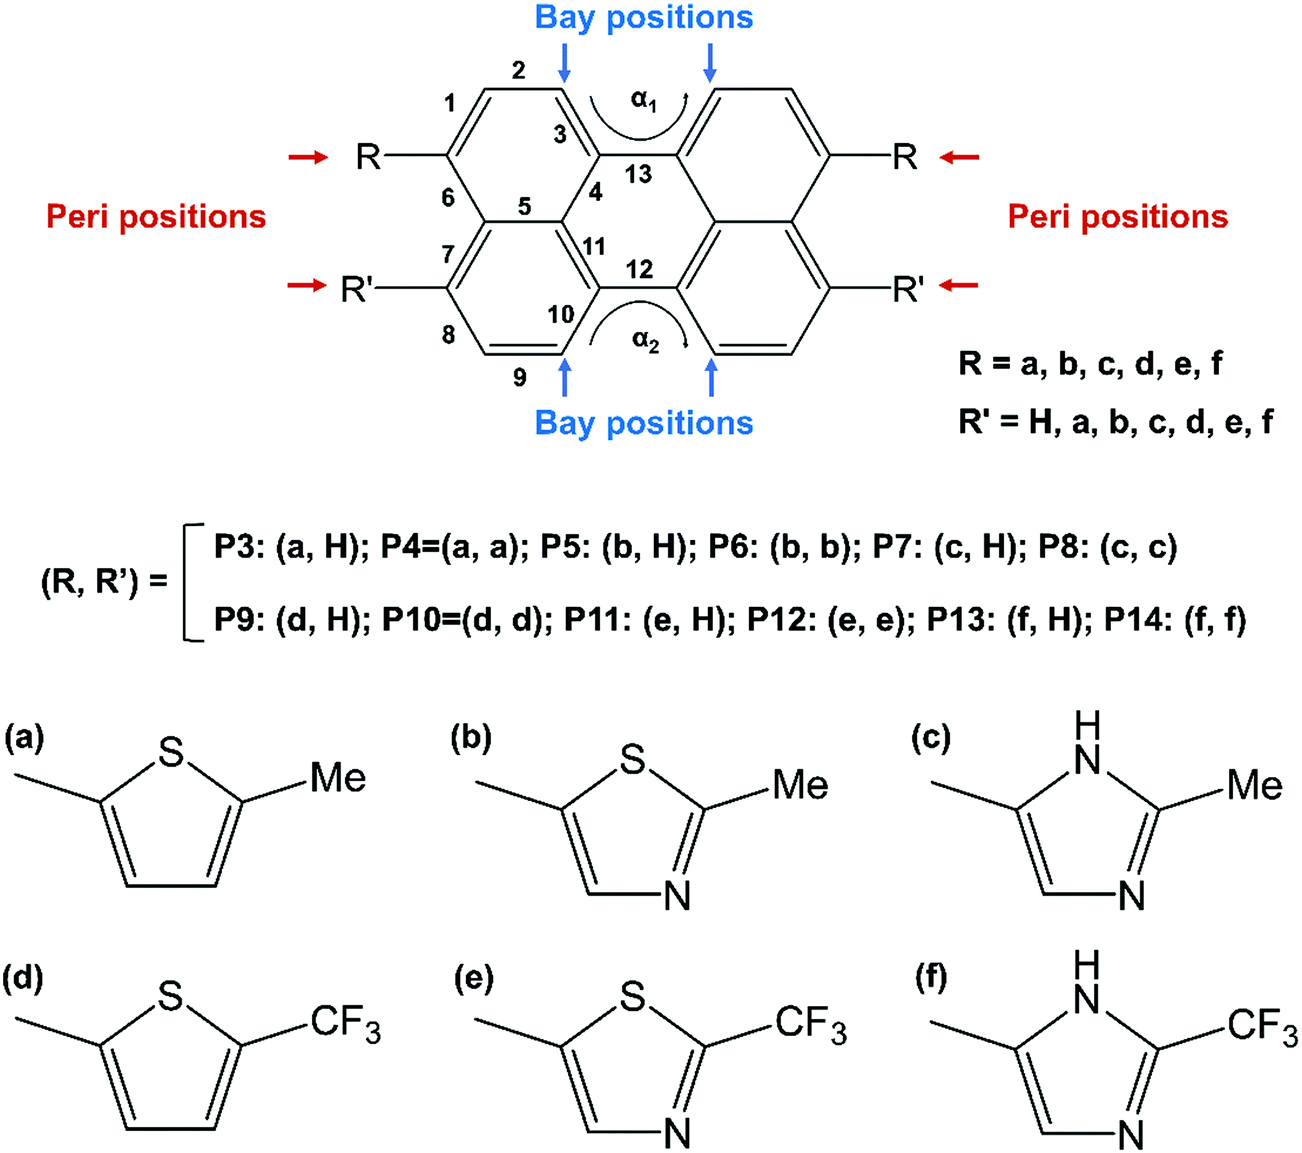 Synergistic effects of side-functionalization and aza-substitution